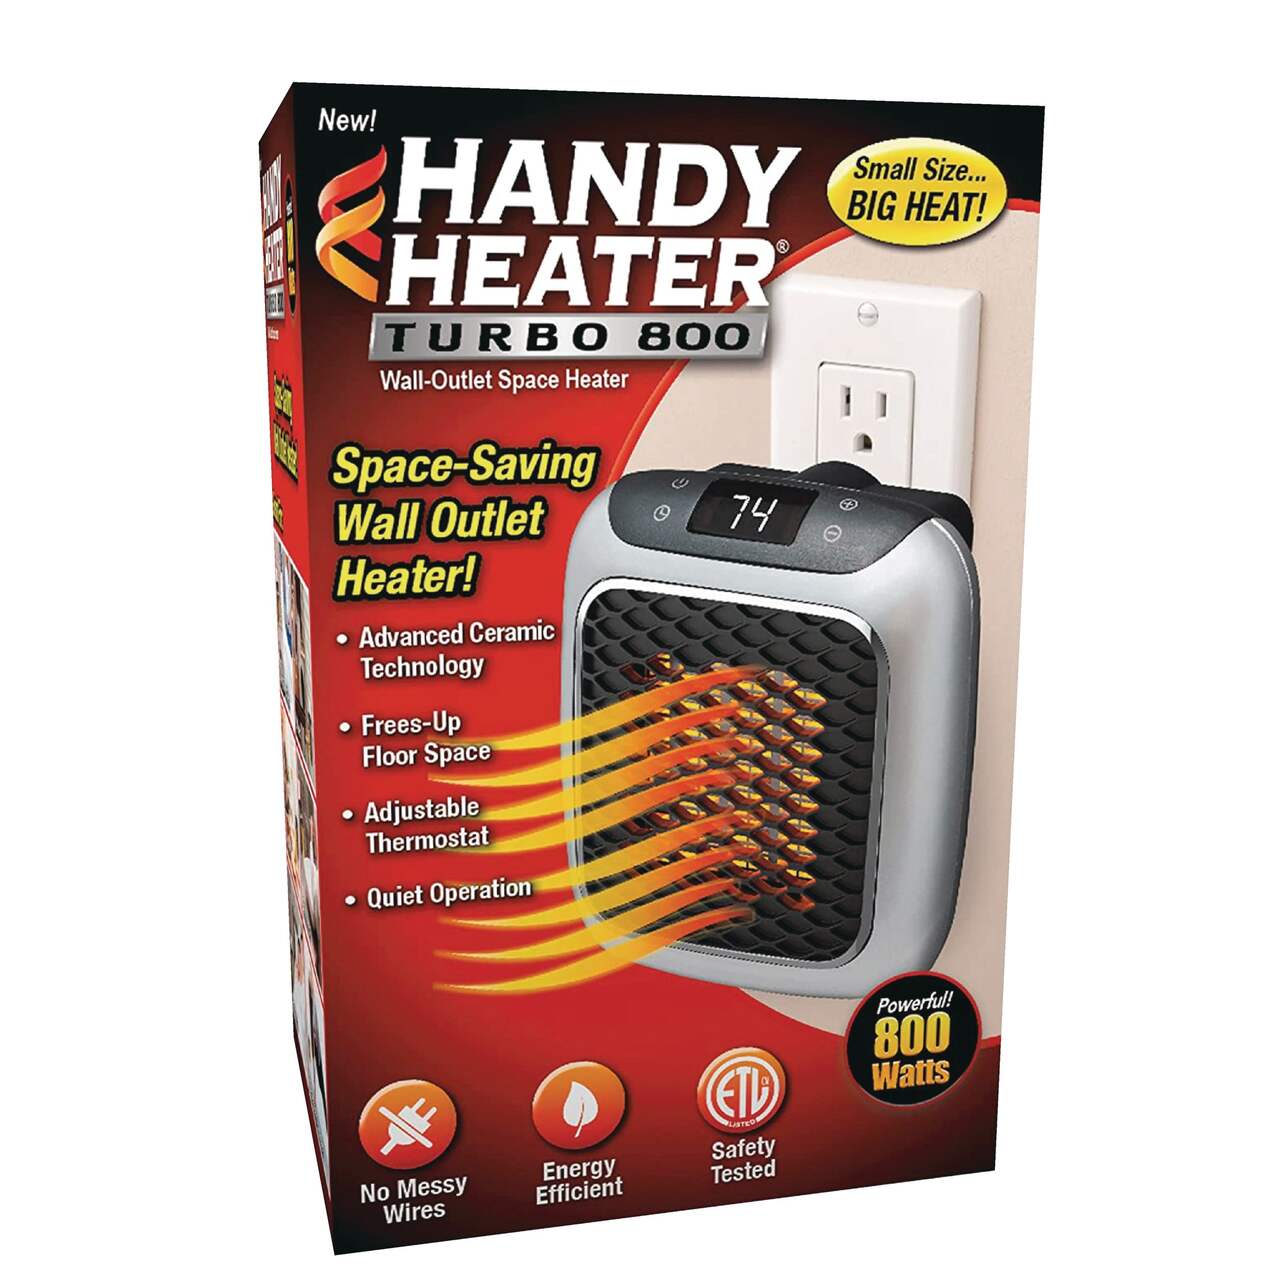 https://media-www.canadiantire.ca/product/living/as-seen-on-tv/asotv/4990098/handy-heater-turbo-800-fd90144b-2af2-41b1-bf26-90ac3ae8d0ae-jpgrendition.jpg?imdensity=1&imwidth=640&impolicy=mZoom